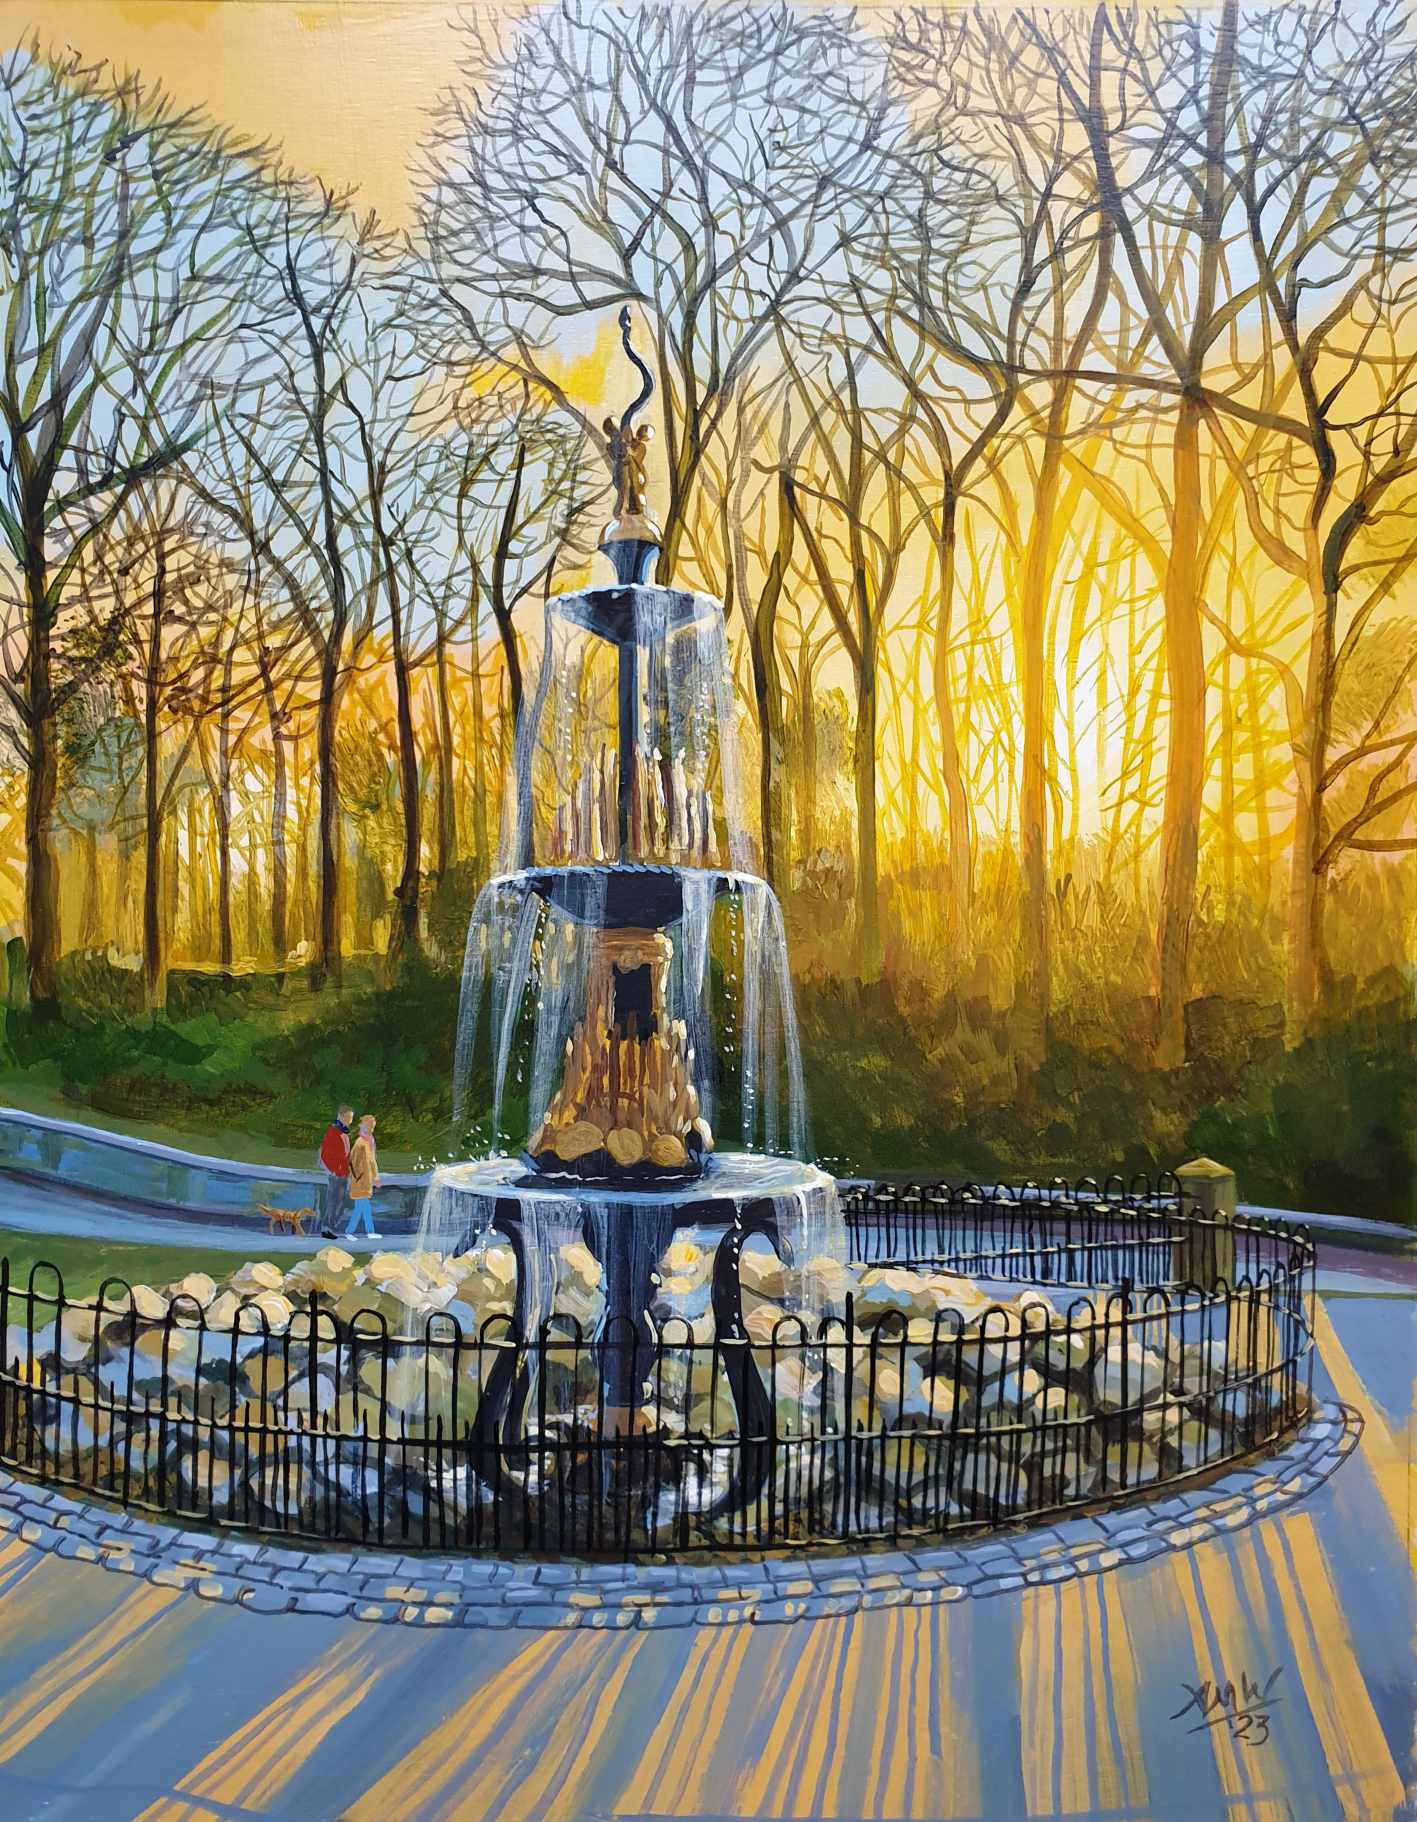 Artwork by Southport artist Tony Wynne. The fountain at Hesketh Park in Southport